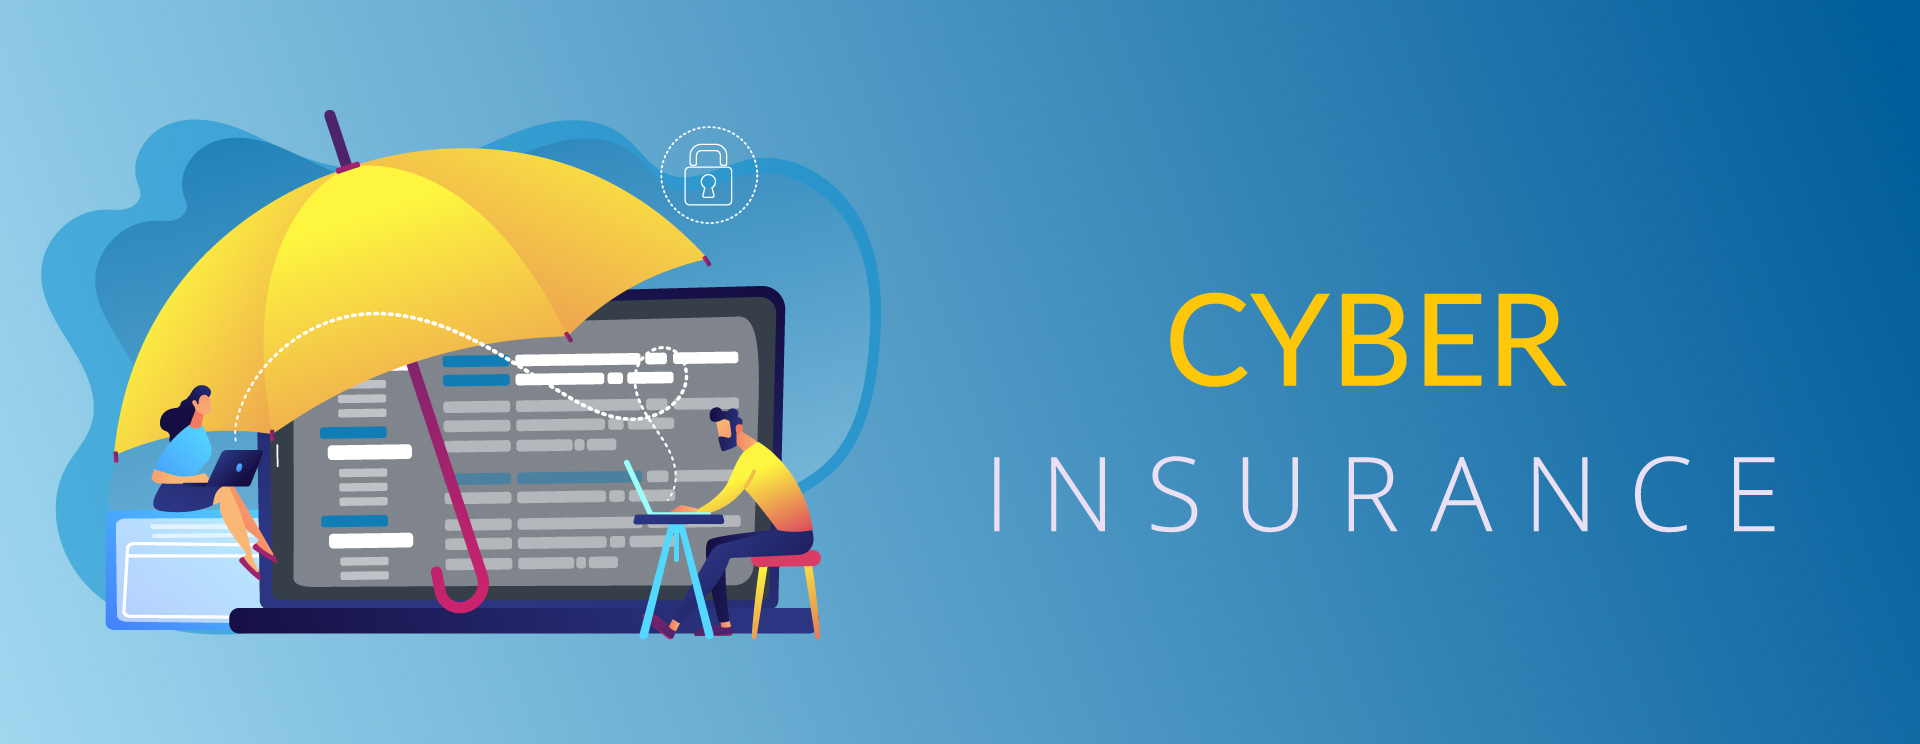 Cyber insurance protects organizations against cybercrime when cybersecurity isn’t enough.